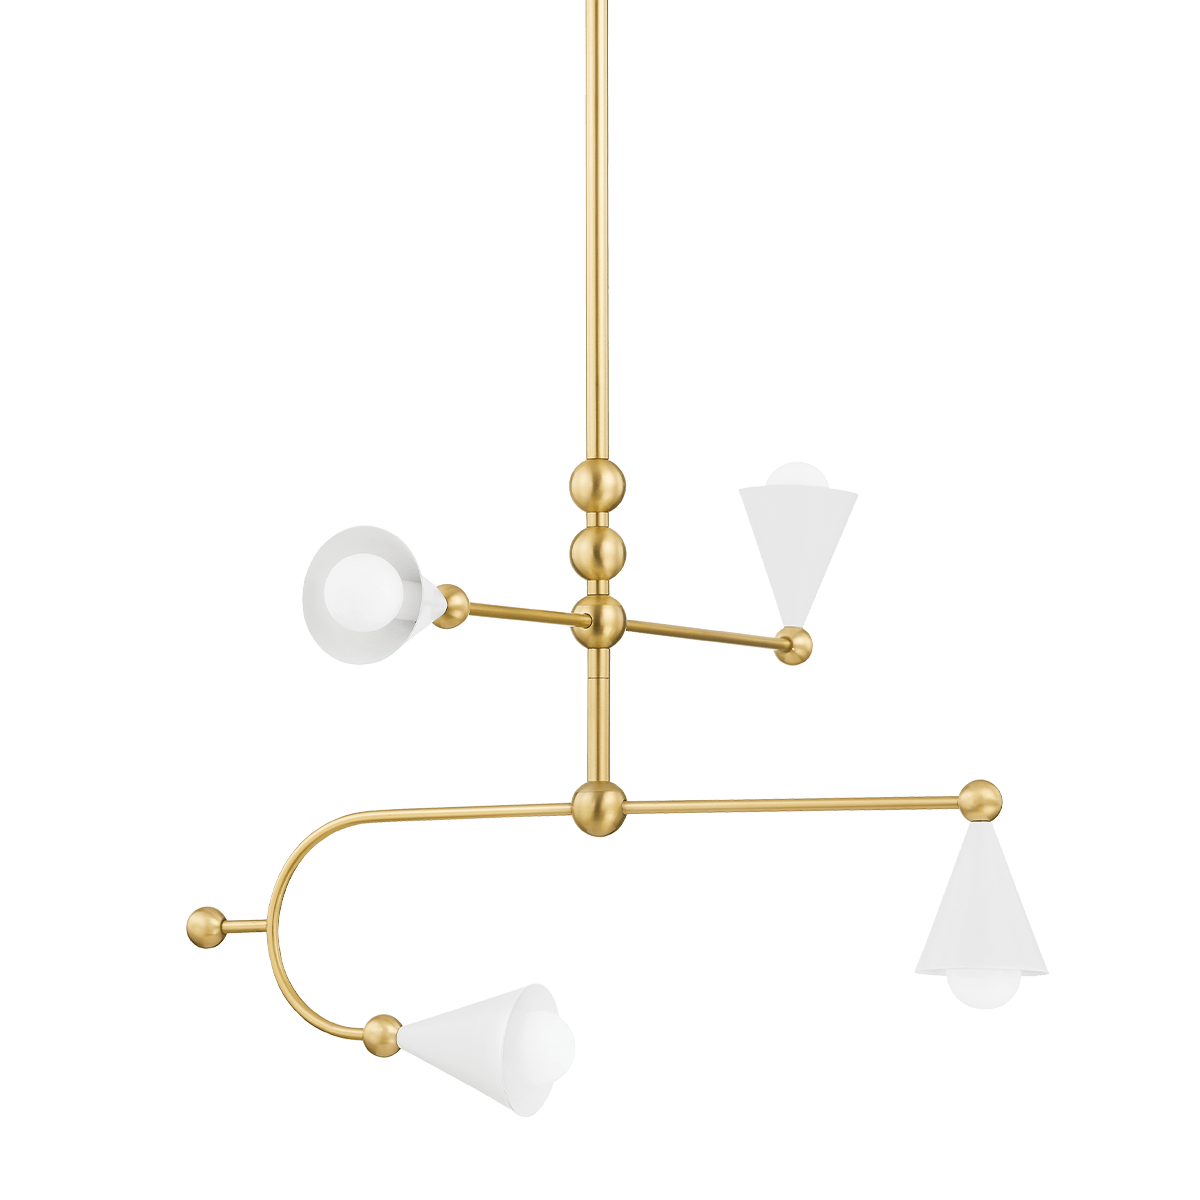 Aged Brass Arms with Soft White Conical Shade Chandelier - LV LIGHTING